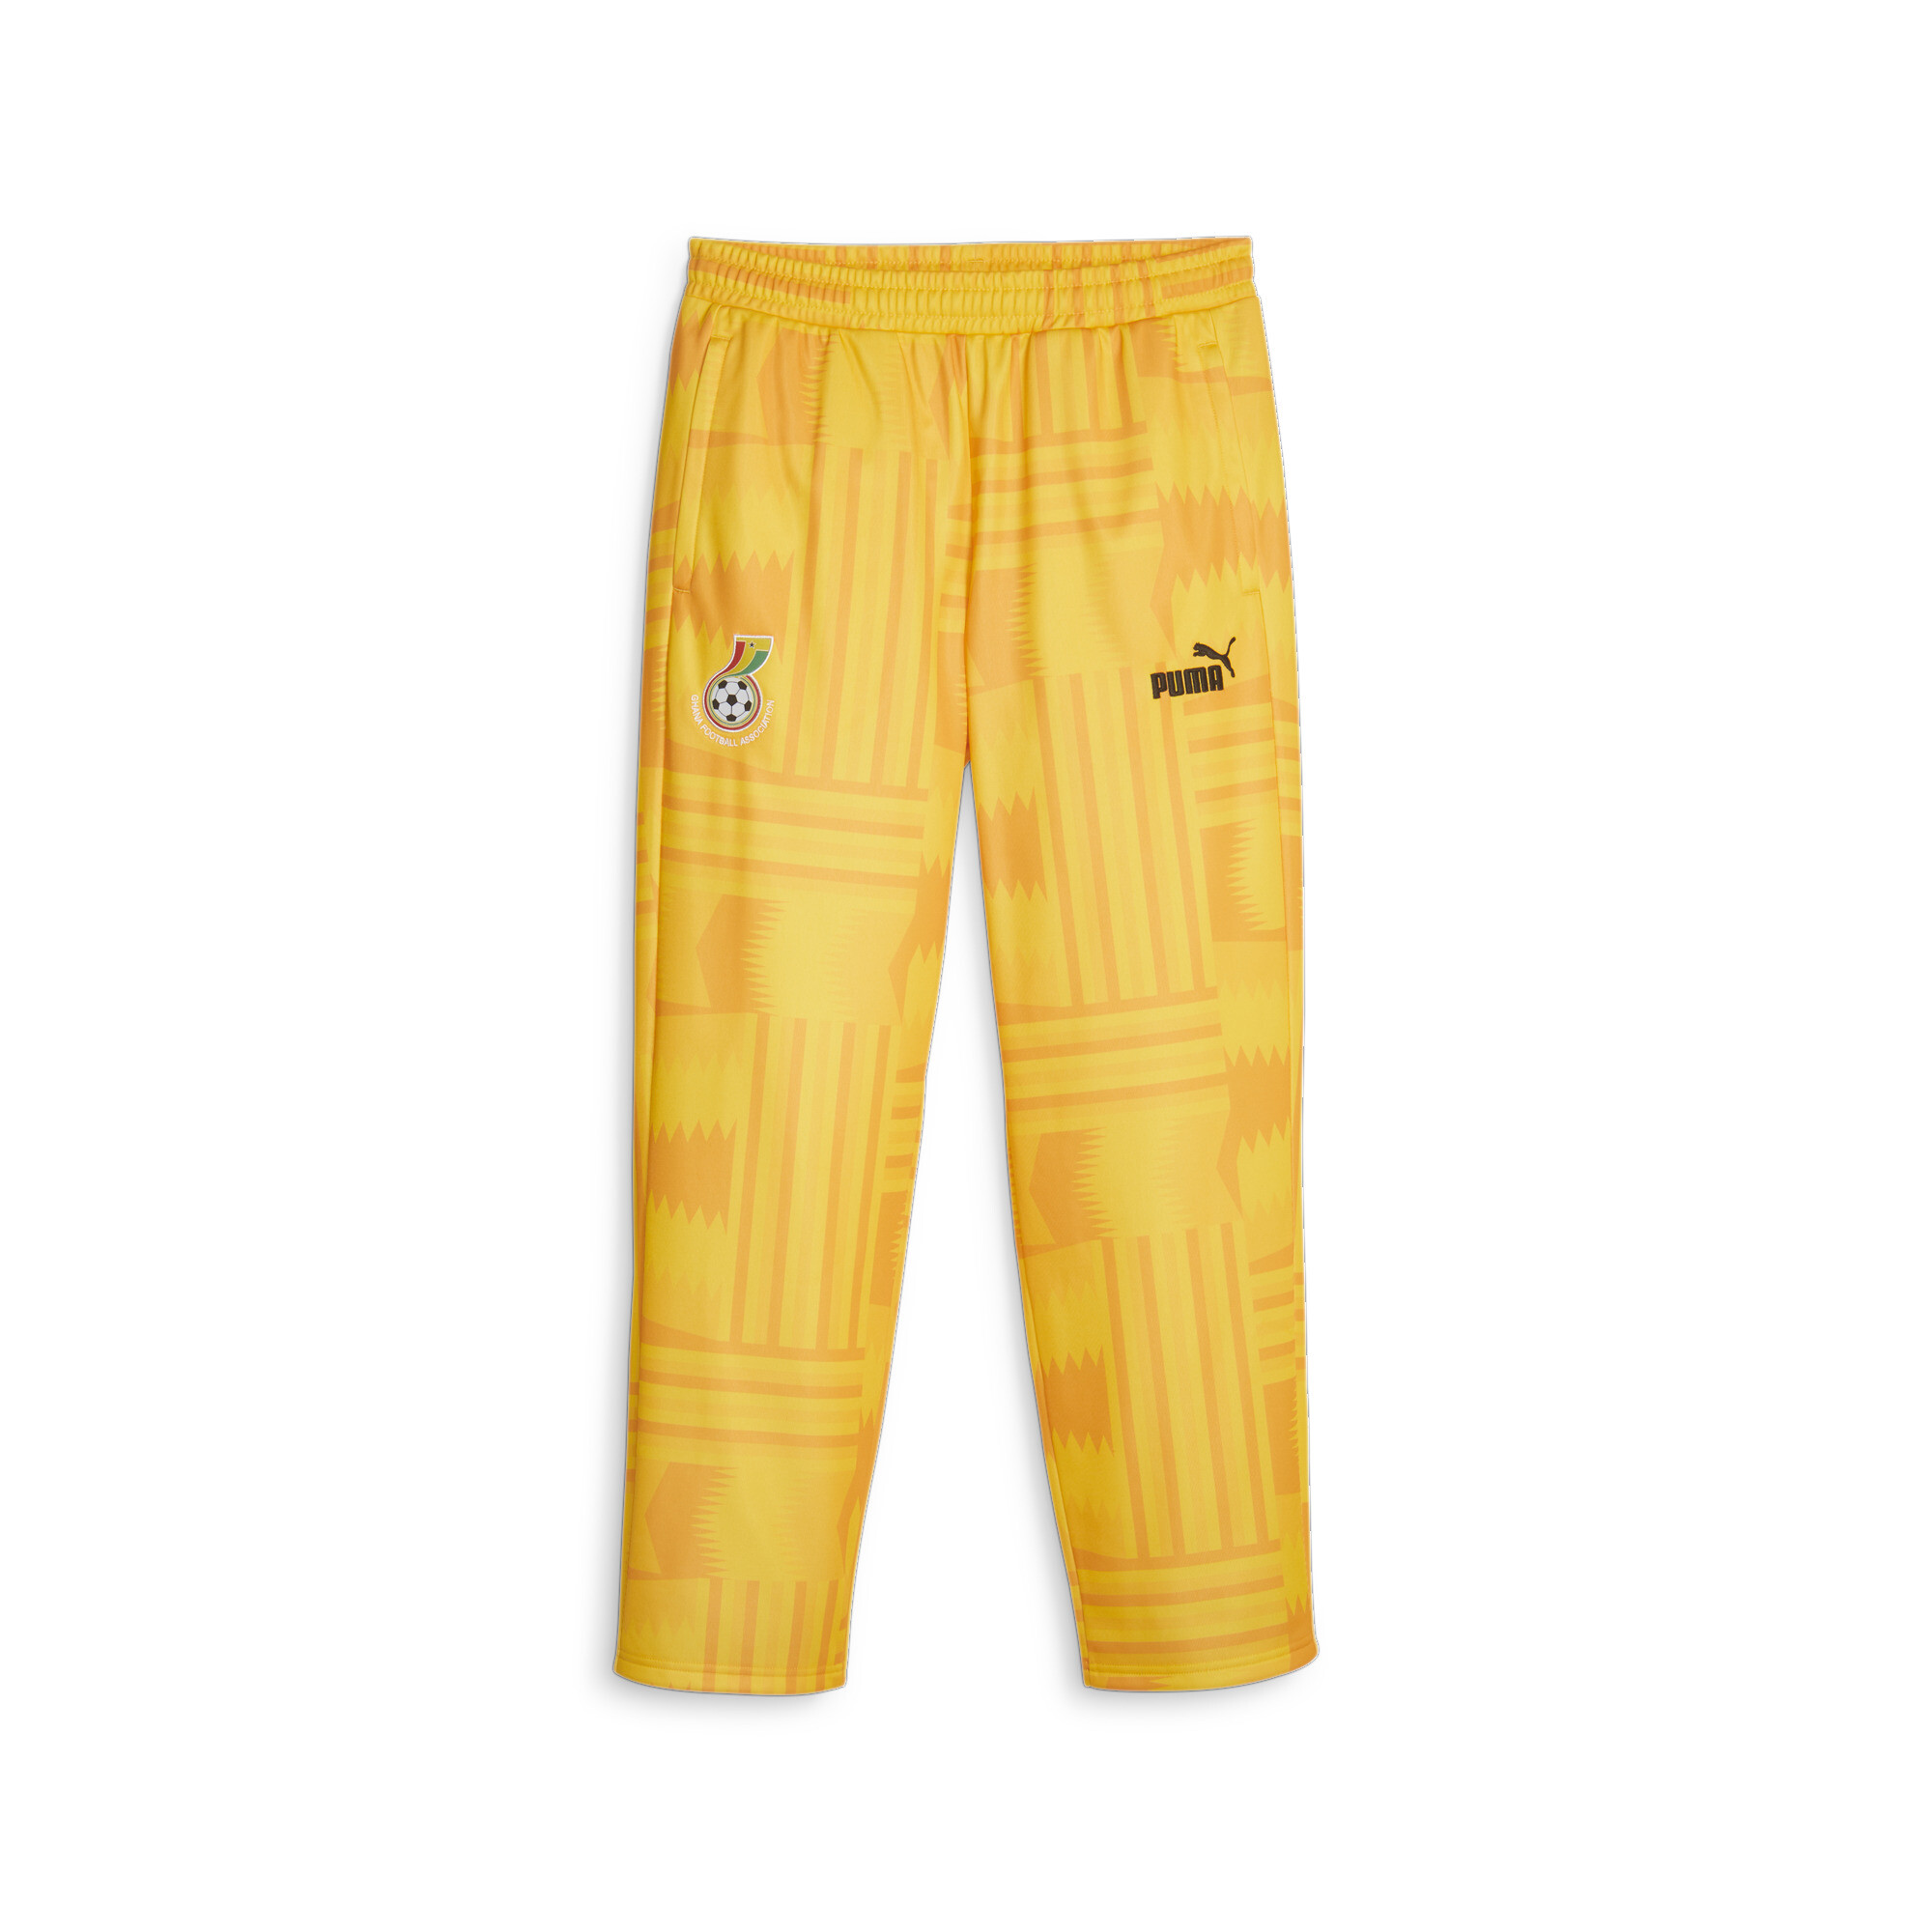 Men's PUMA Ghana FtblCulture Track Pants In Yellow, Size Small